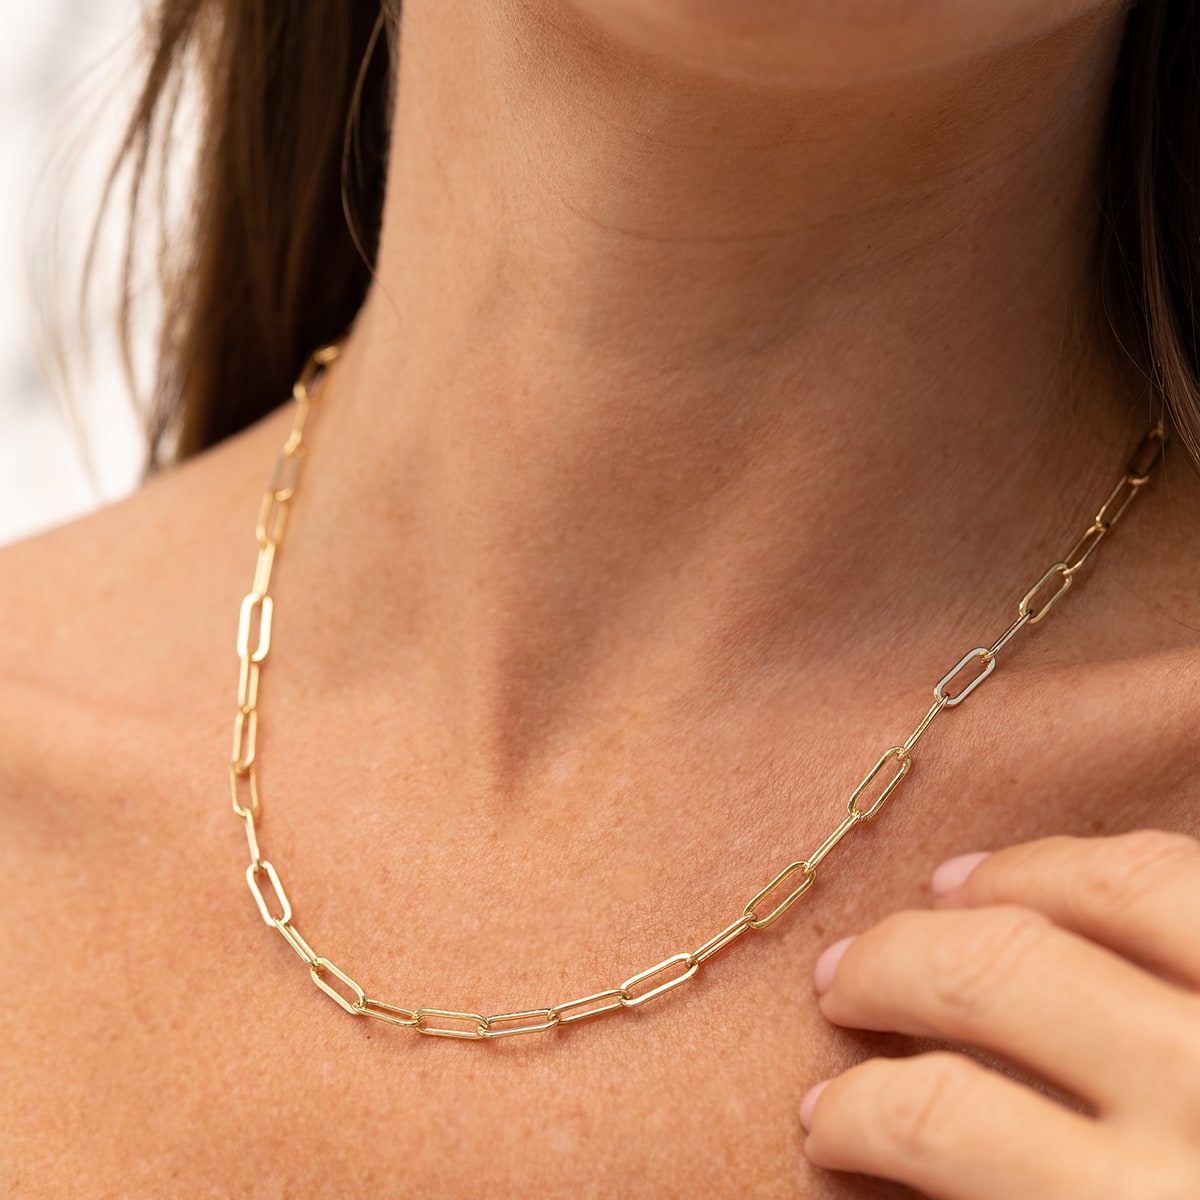 Affordable gold chain link necklace